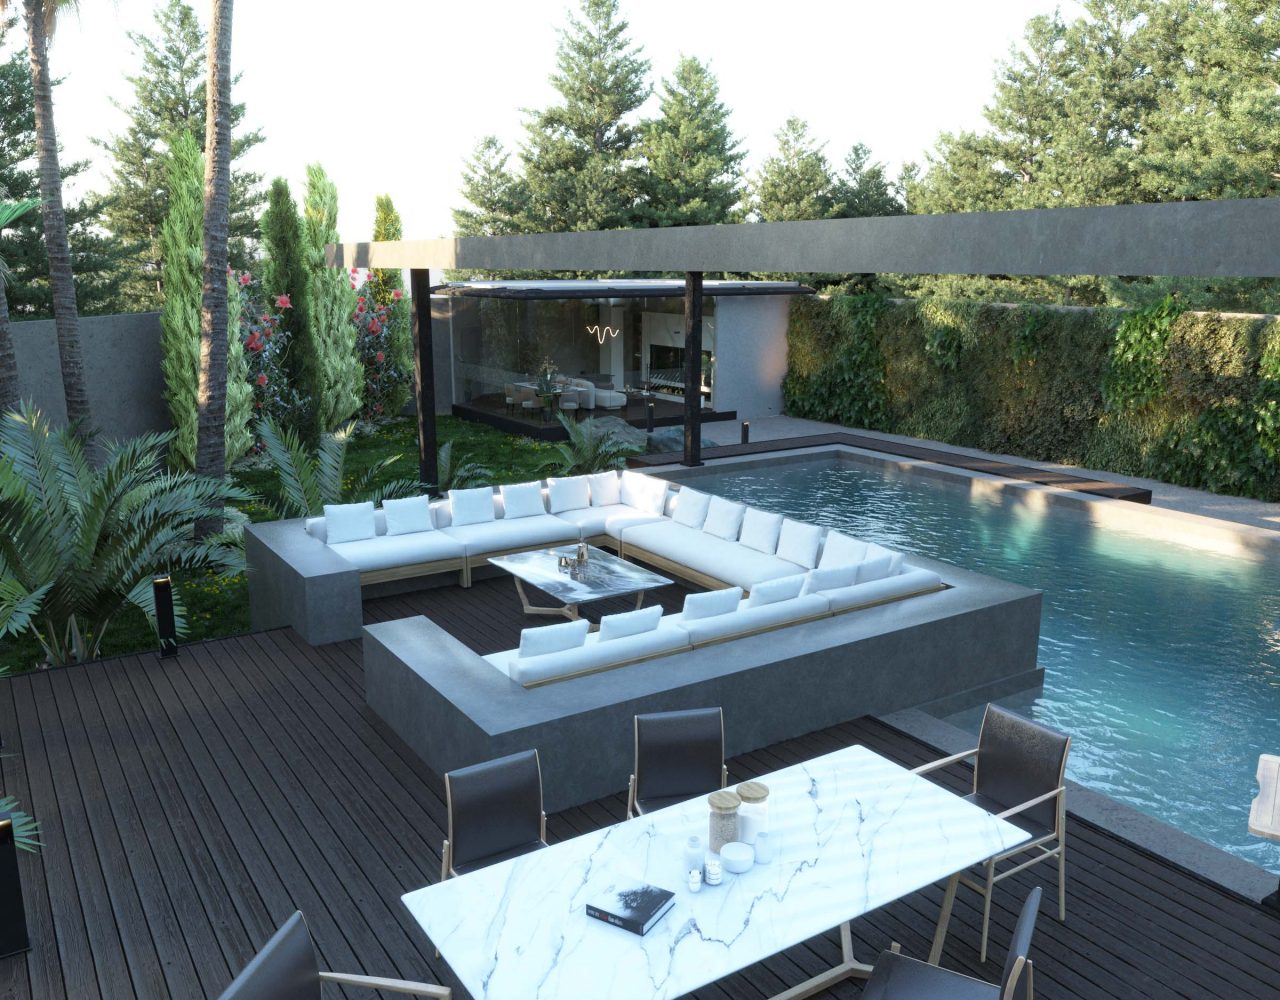 SWIMMING POOL AREA DESIGN - sitting area - water - dining area